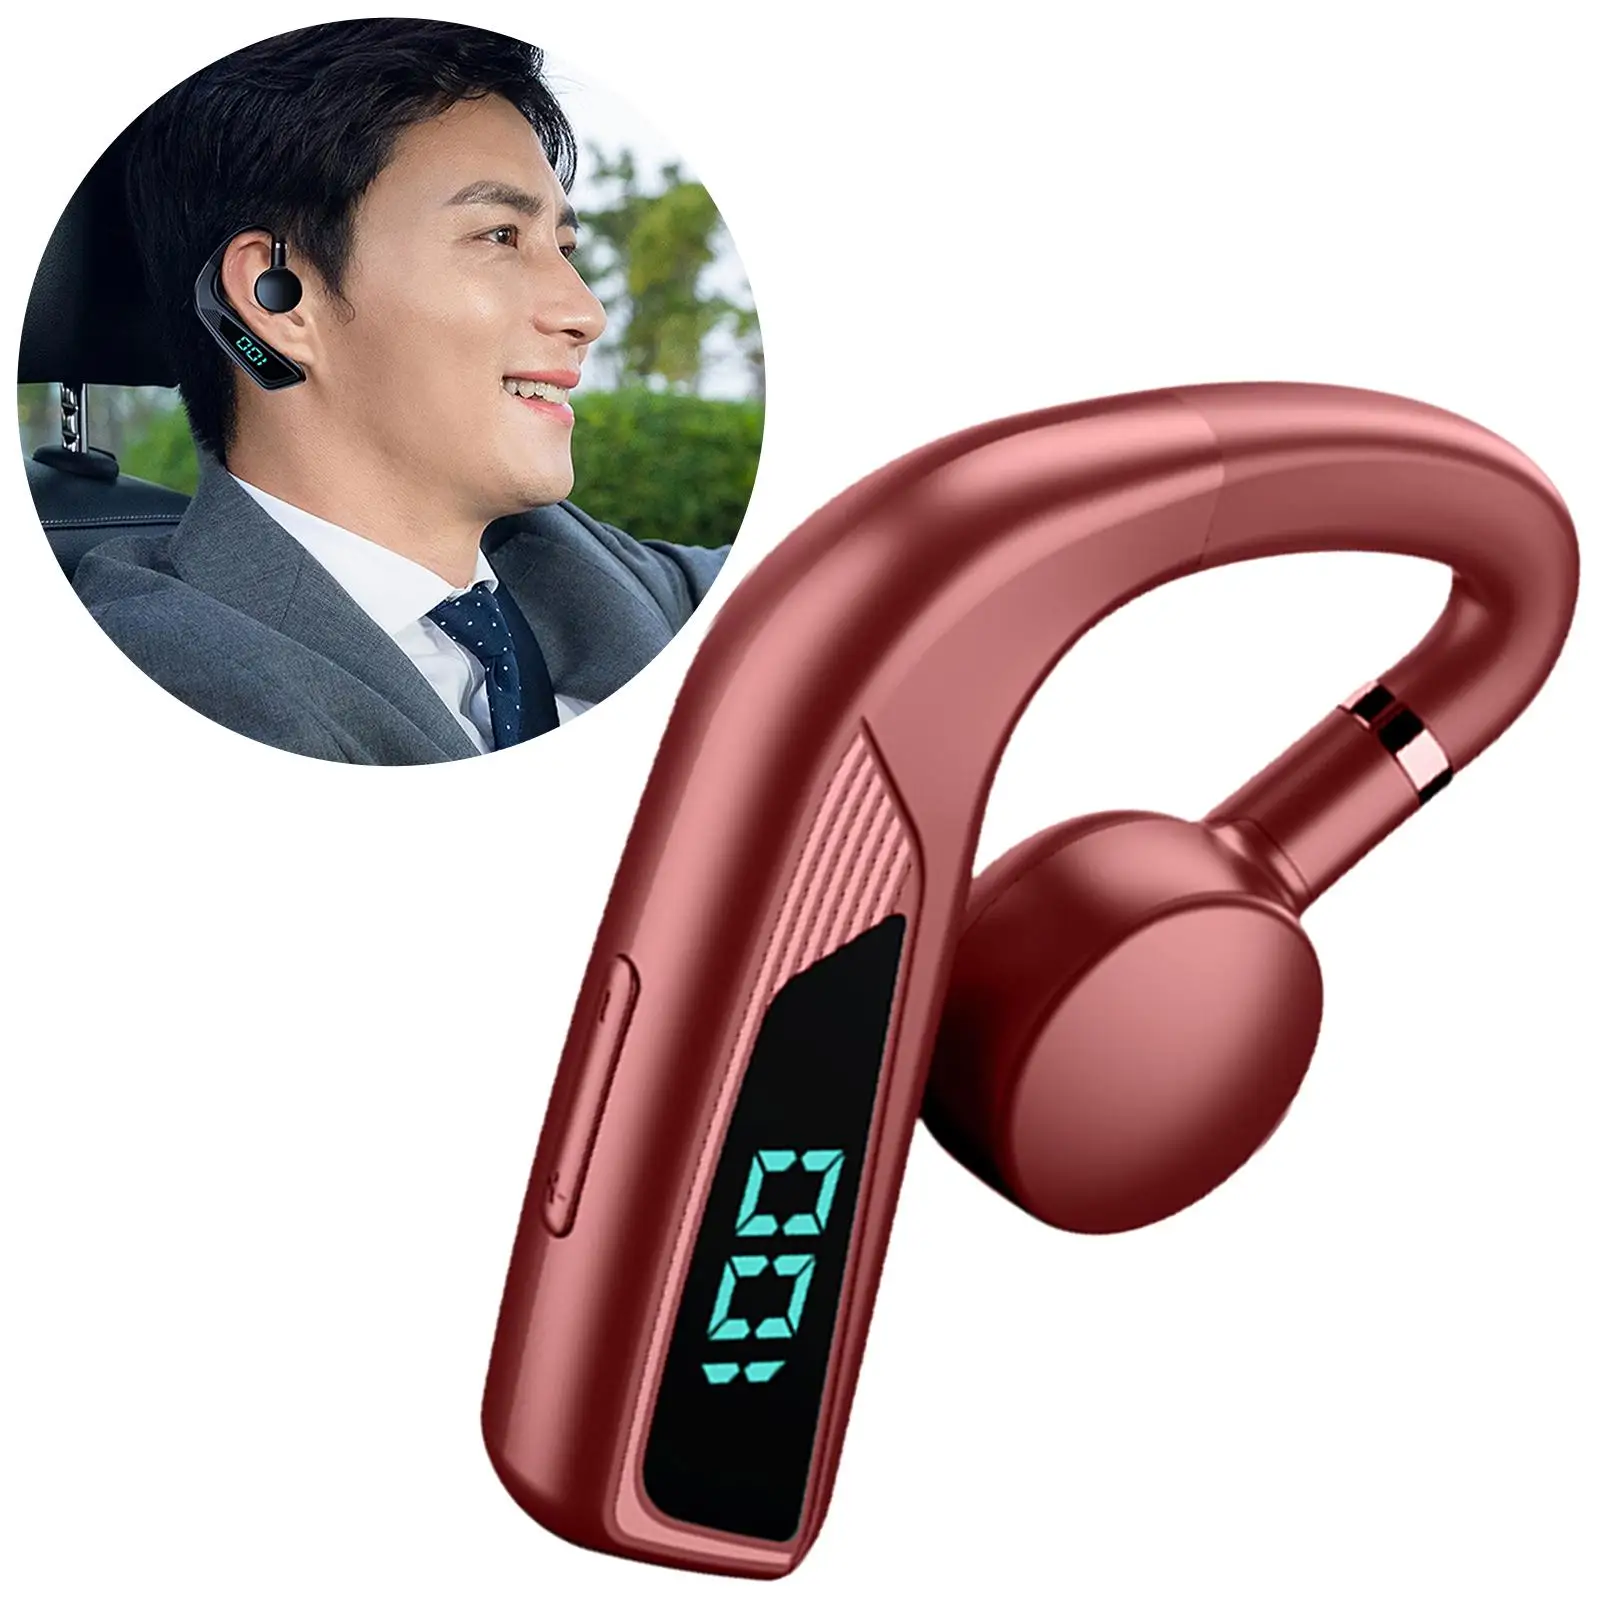 Bone Conduction Headphones Sweat Resistant Noise Cancelling Earphones for Bicycling Driving